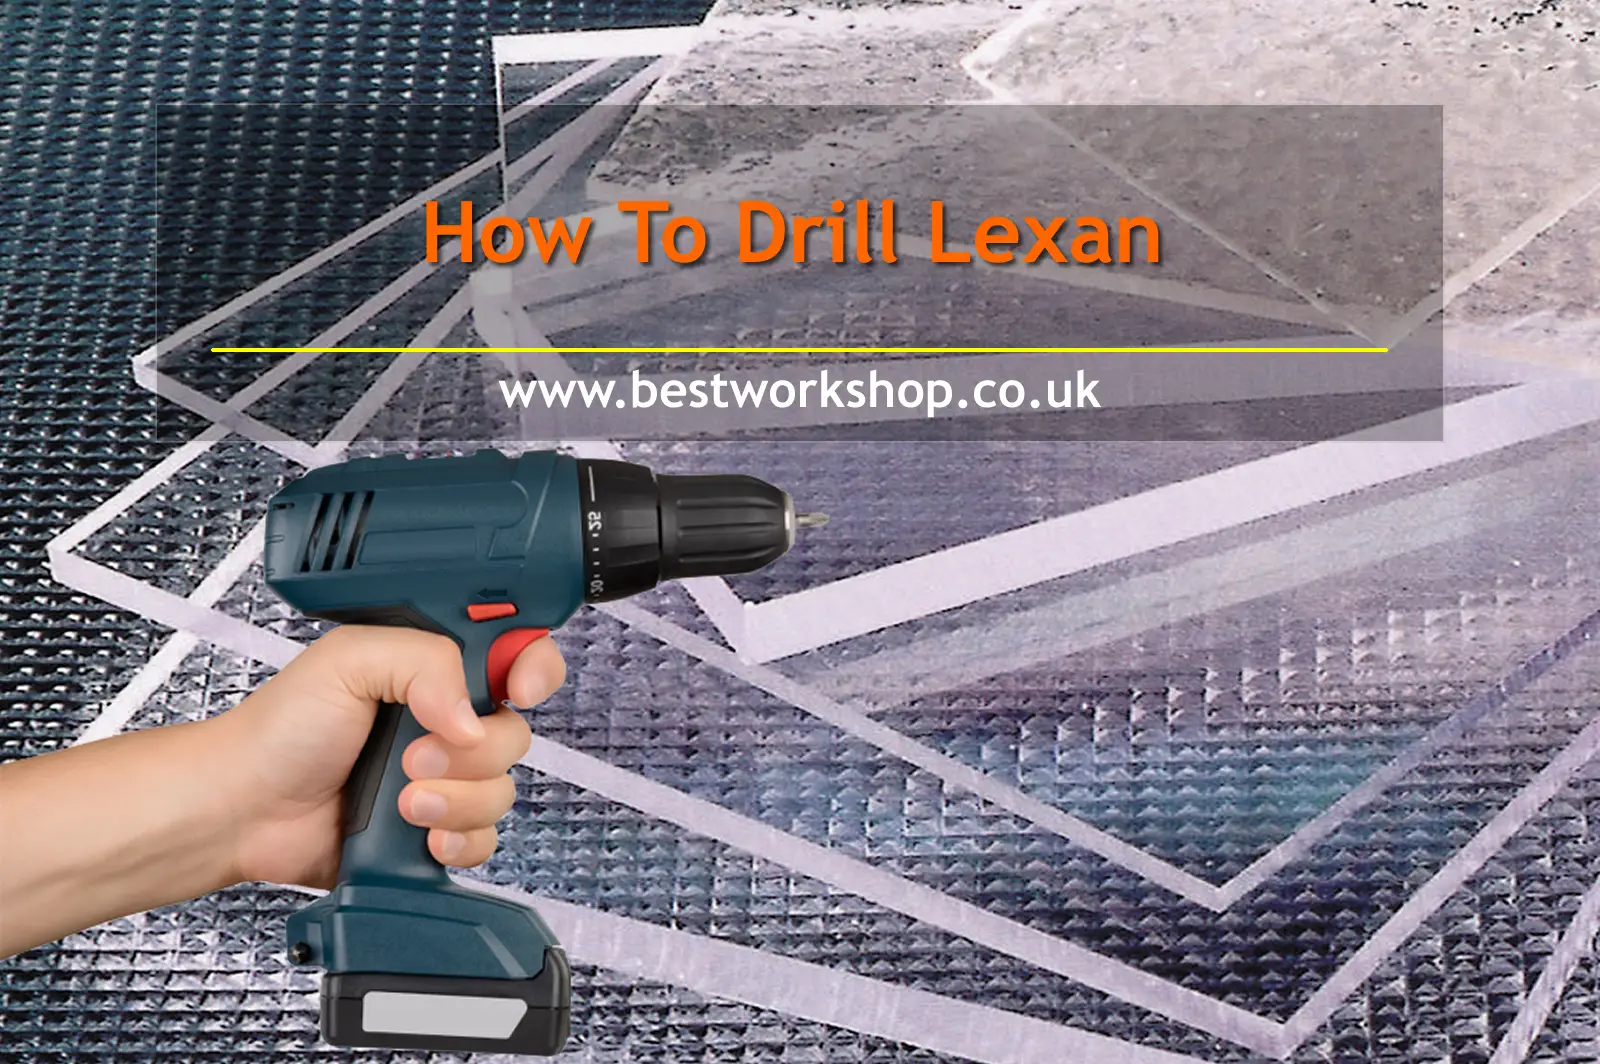 How to drill lexan